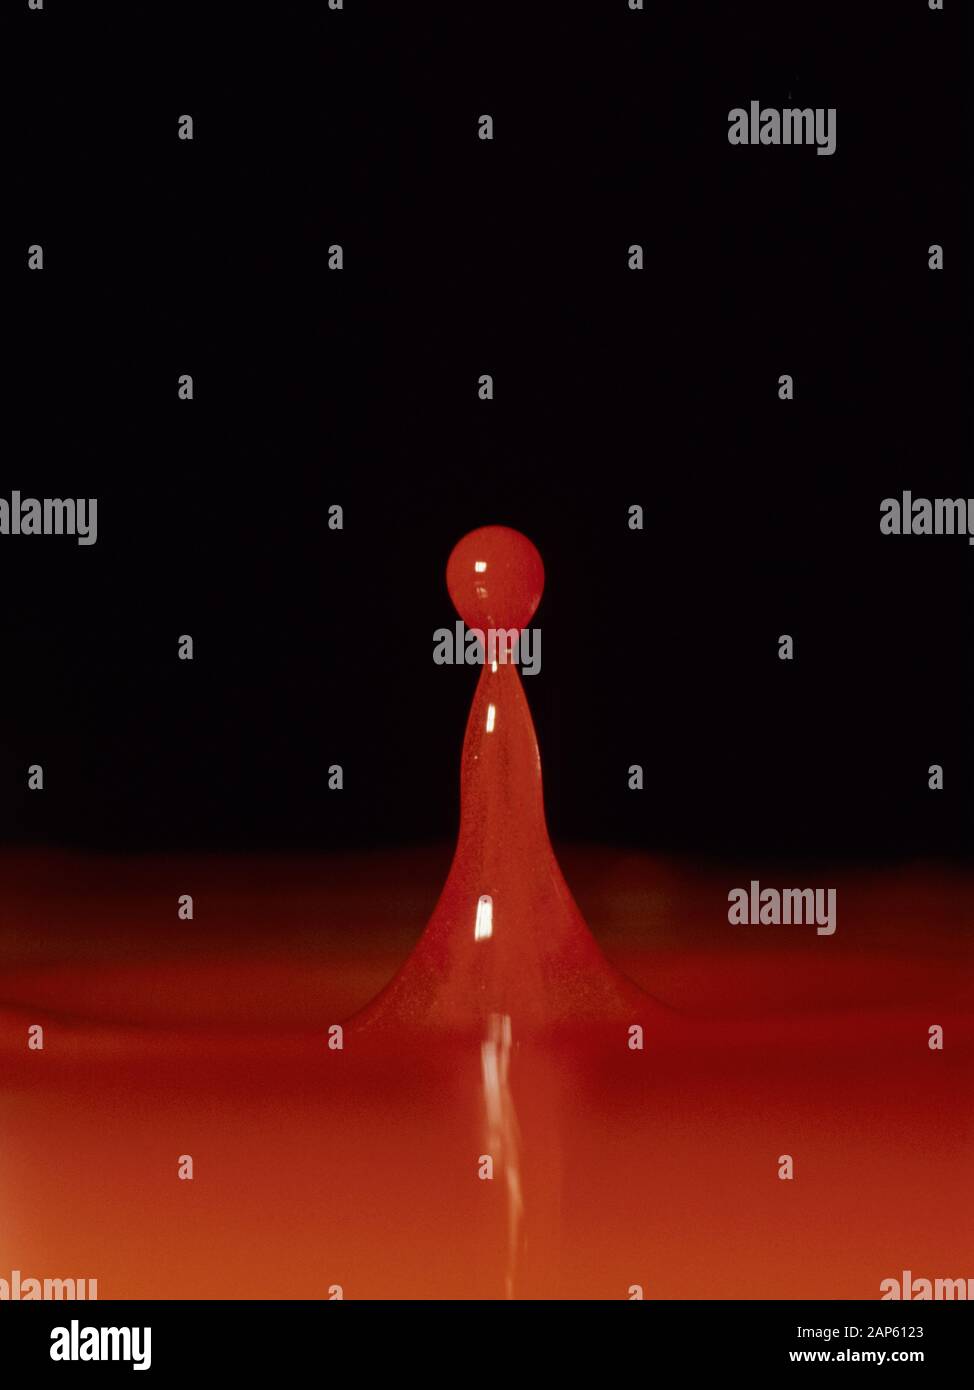 Coluimn of liquid caused by red dyed water droplet falling into shallow water and forming a neck and a satellite droplet as it fass back Stock Photo